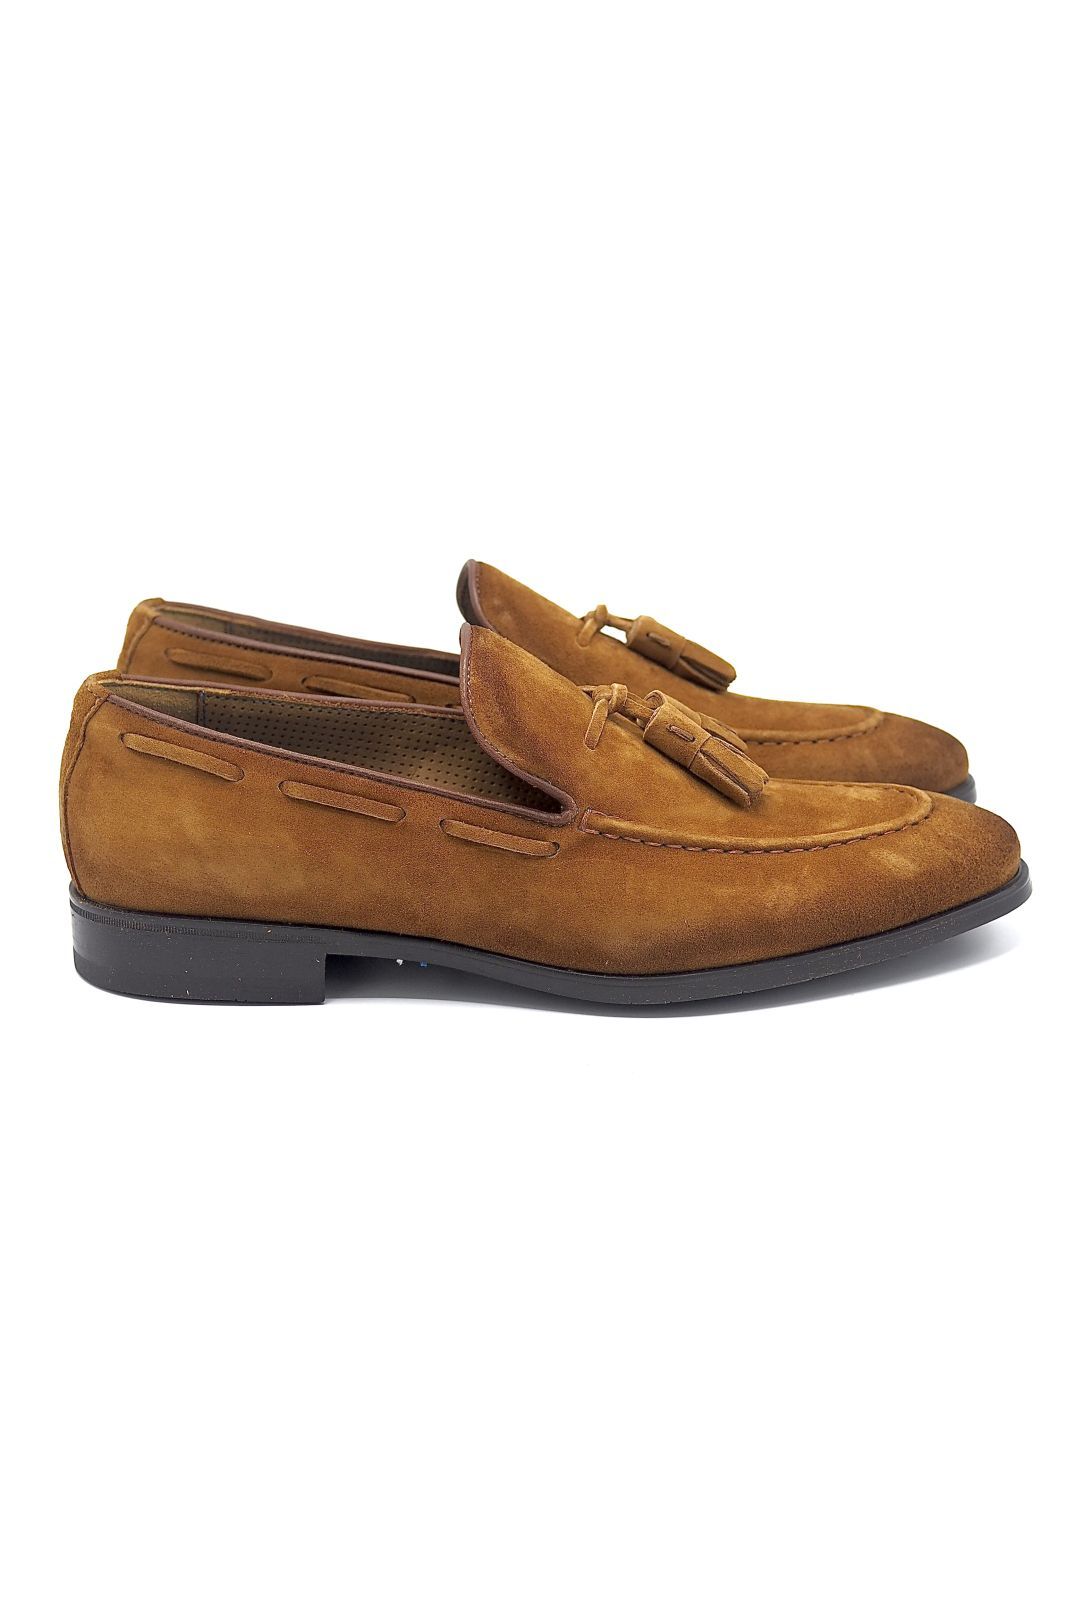 Giorgio 1958 mocassin Naturel hommes (GG1958-Collège - 50502 COLLEGE cognac) - Marine | Much more than shoes